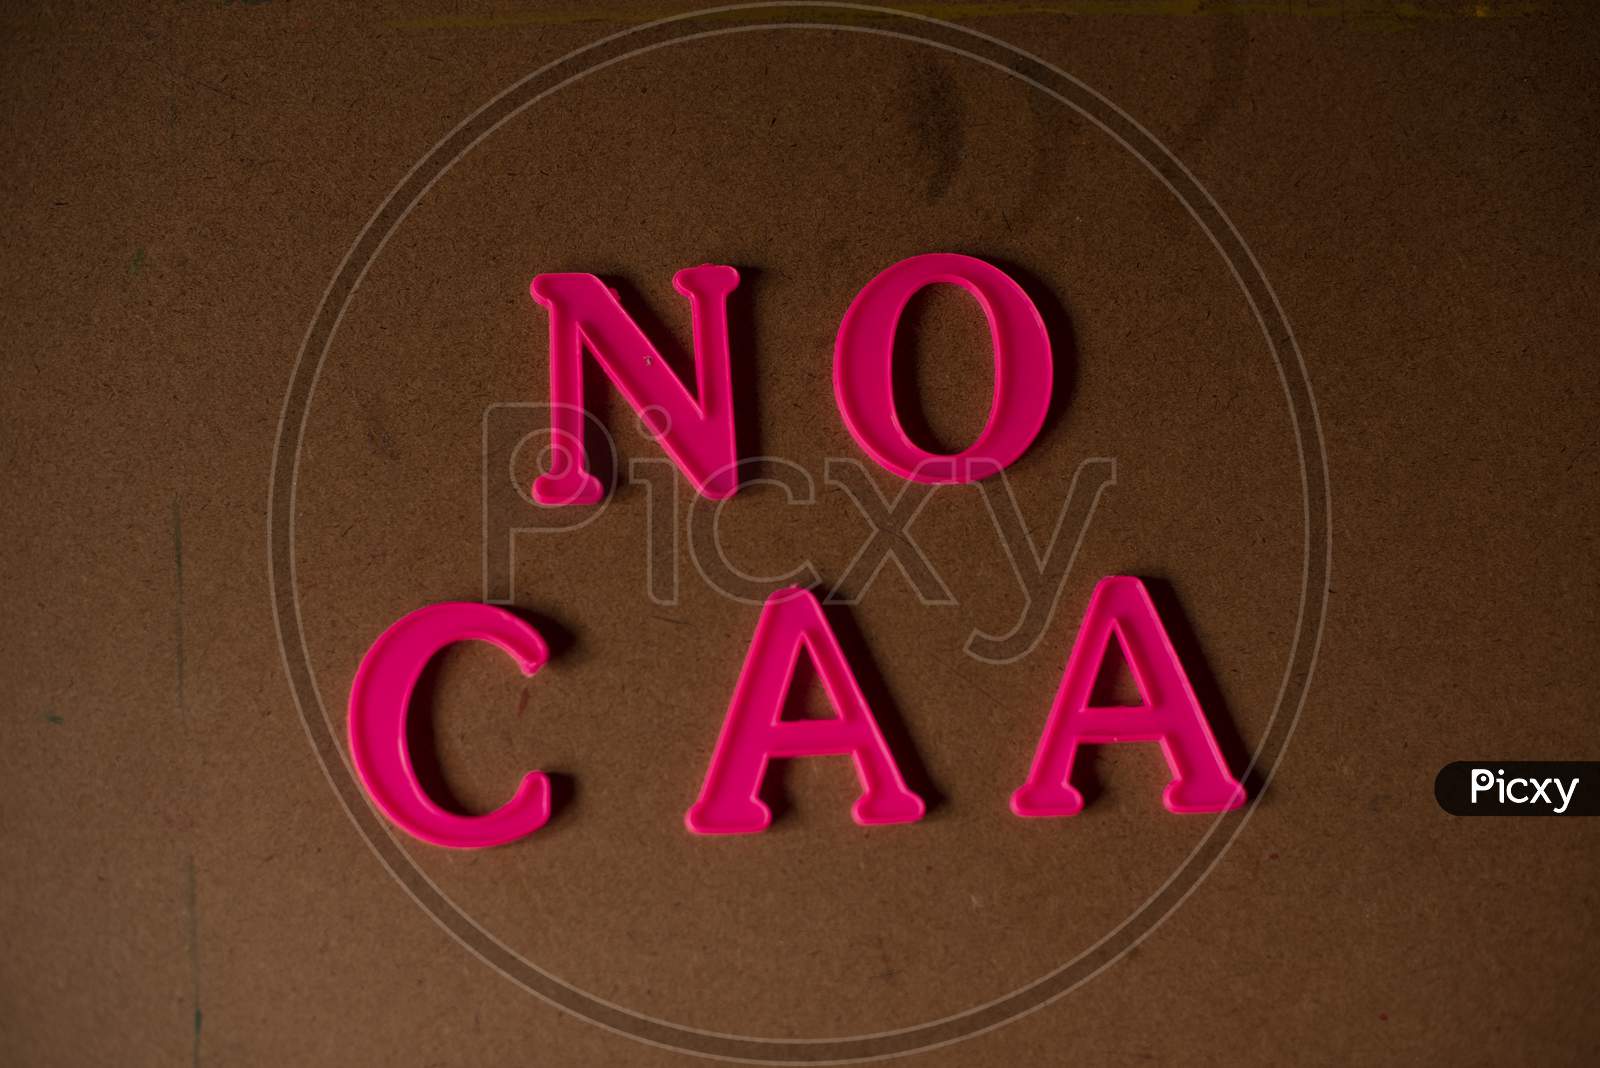 'NO CAA' written on a brown wooden background with lines of shadow.